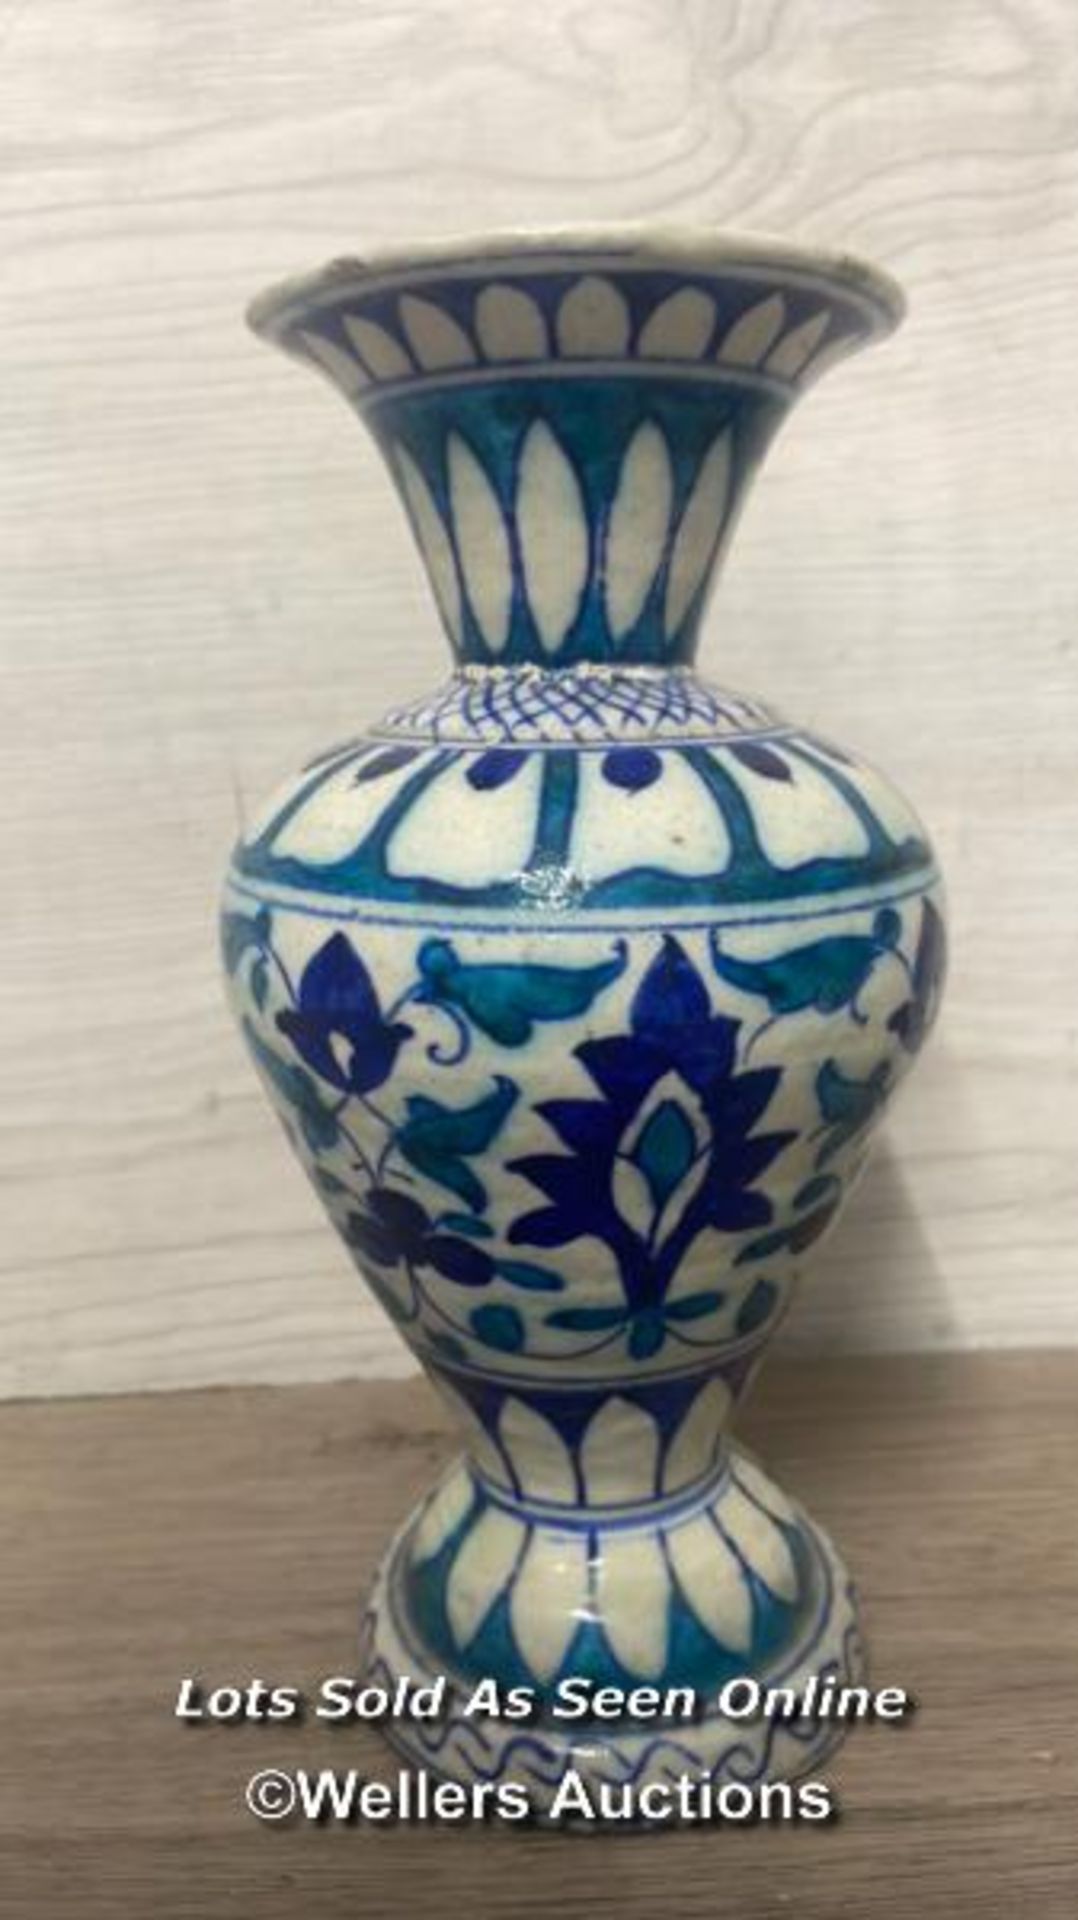 TWO SIMILAR MULTAN POTTERY VASES FROM PAKISTAN, HAND PAINTED BLUE & TURQUOISE FOLIAGE AND FLOWER - Image 2 of 15